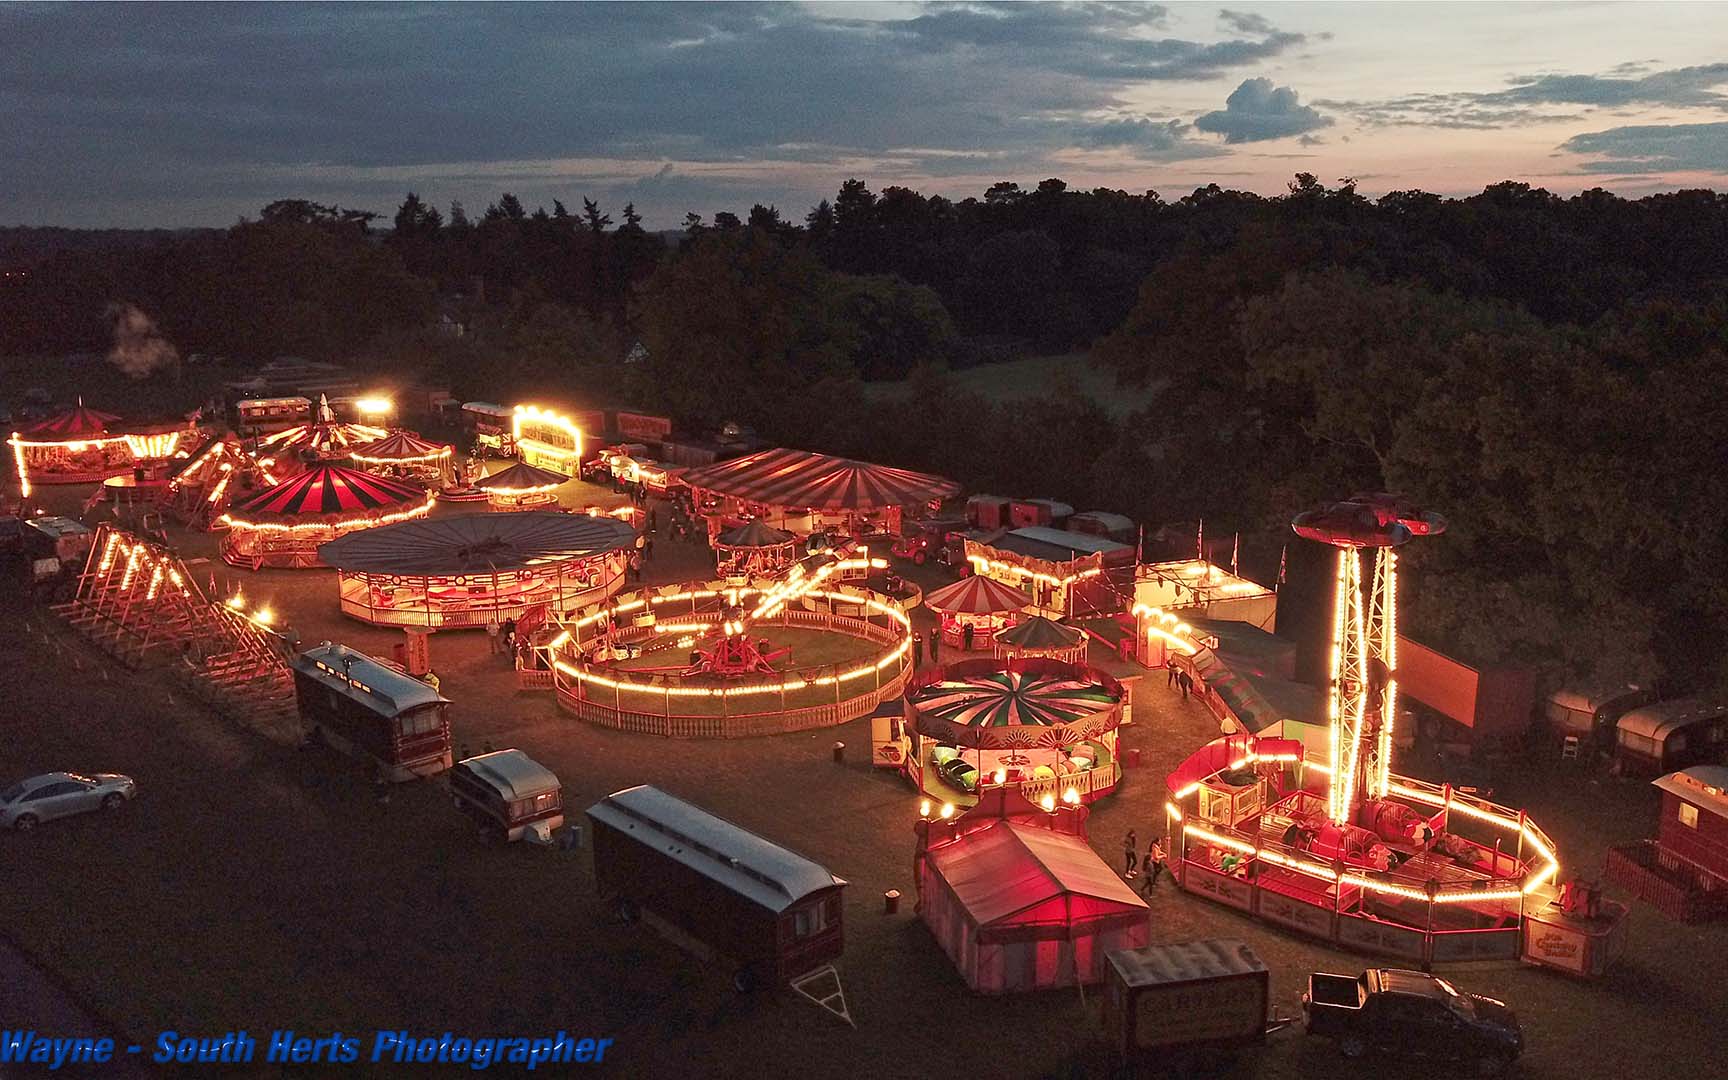 Croxley welcomed the annual visit of Carters Famous Steam Fair for 2017 drone view